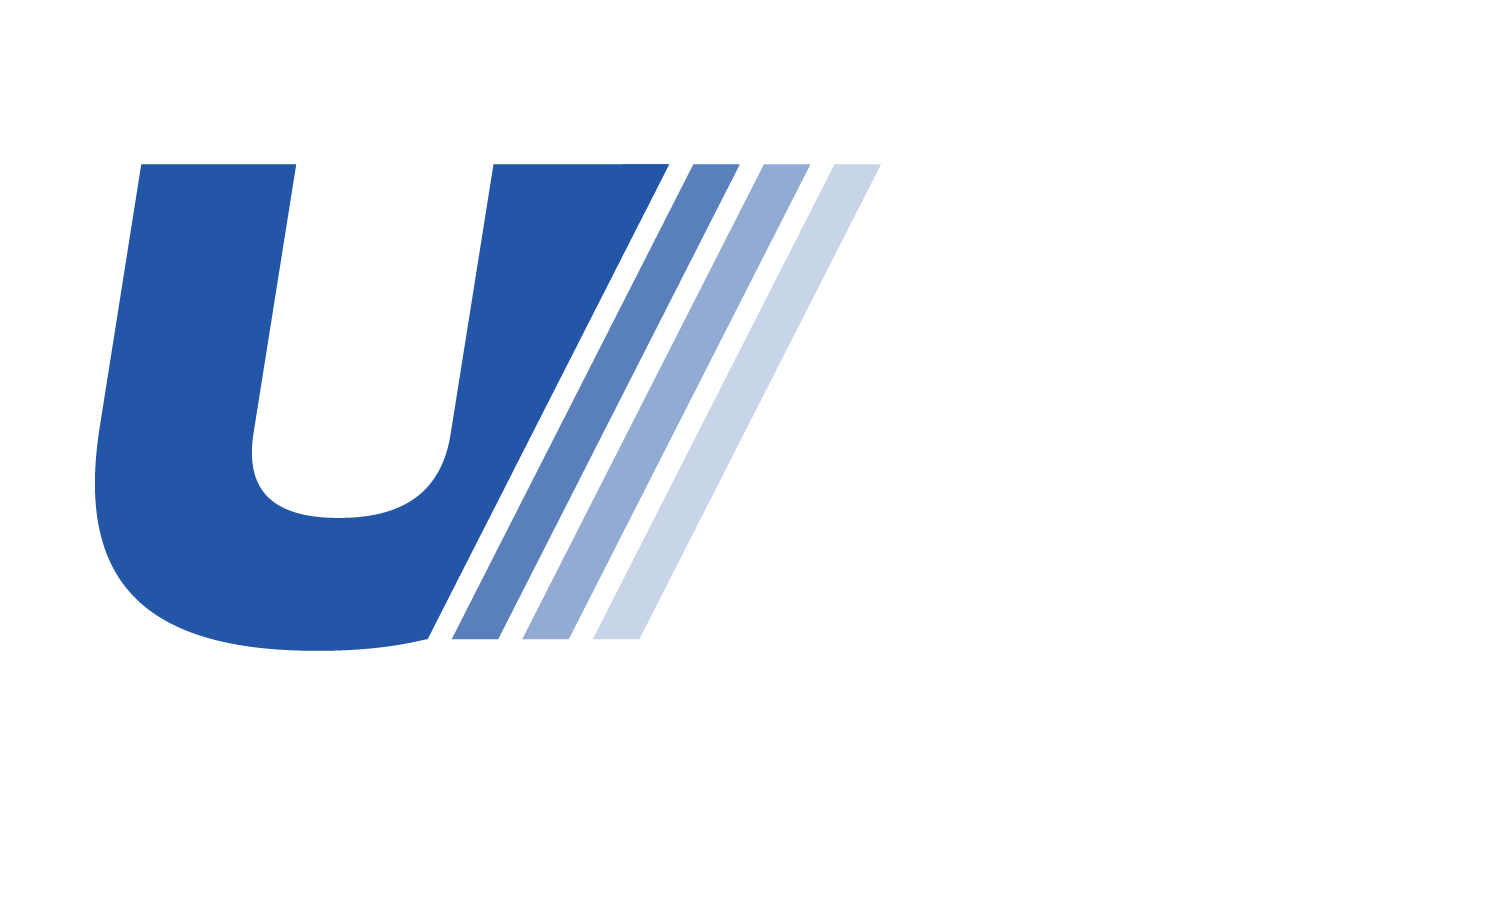 A secondary logo for United Motorsports. The letters U and M with three slanted vertical lines in between them. United Motorsports is written out under.